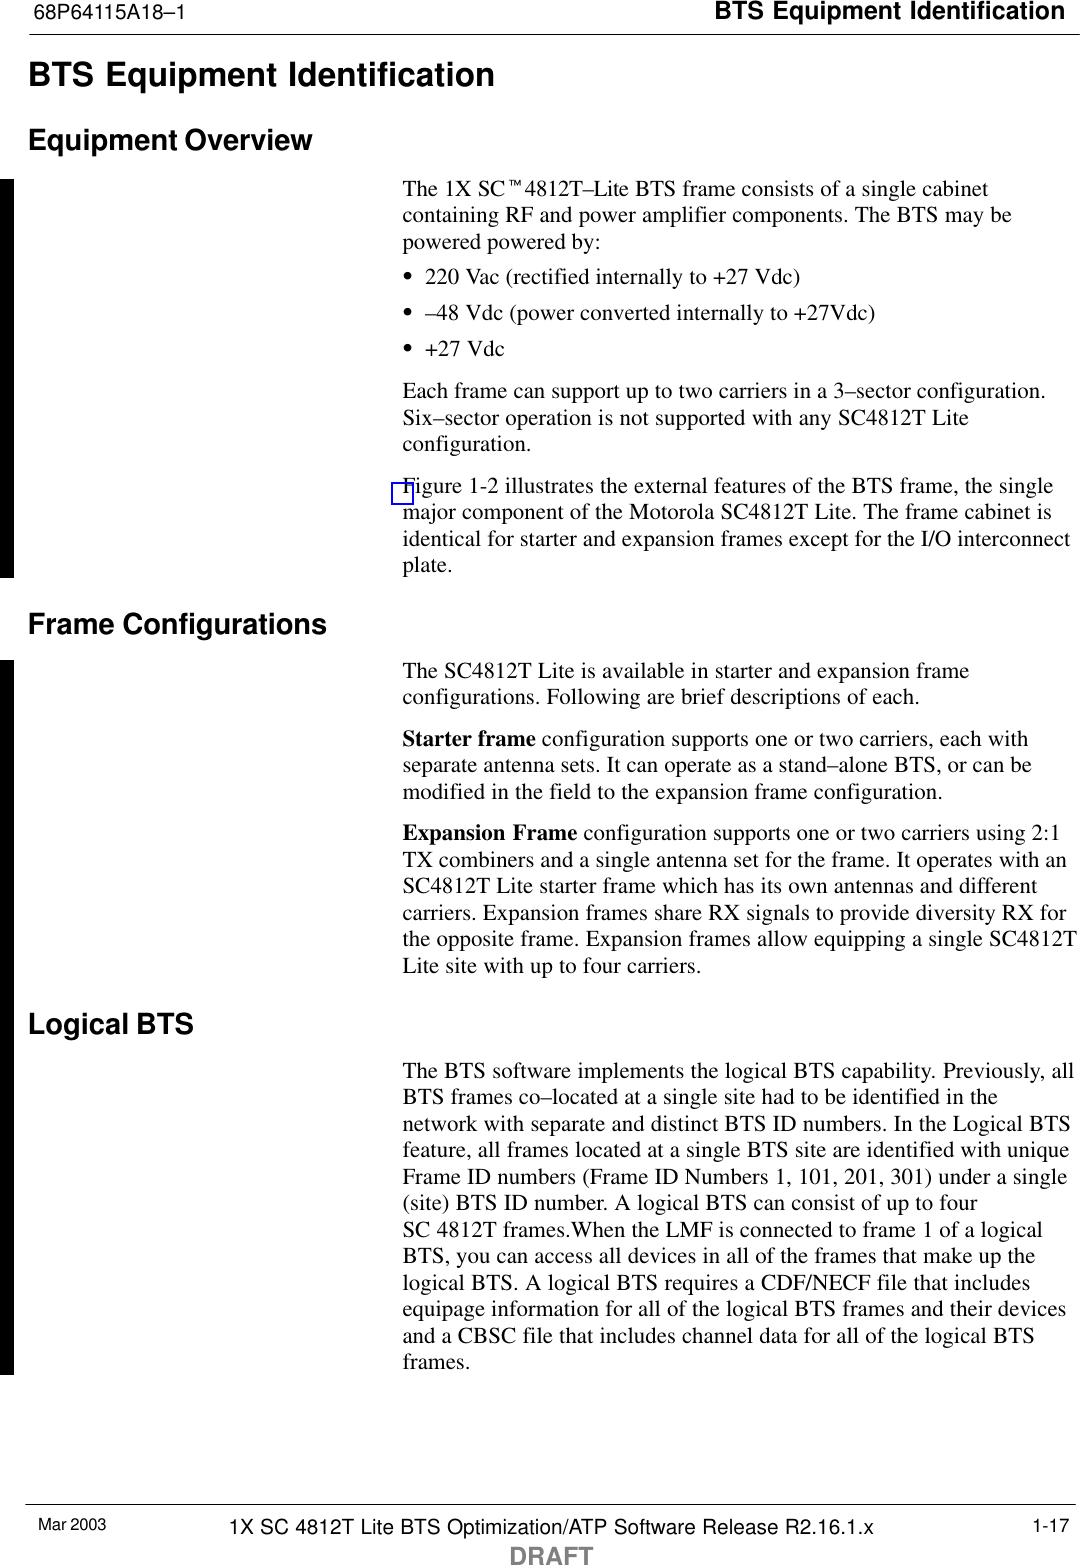 BTS Equipment Identification68P64115A18–1Mar 2003 1X SC 4812T Lite BTS Optimization/ATP Software Release R2.16.1.xDRAFT1-17BTS Equipment IdentificationEquipment OverviewThe 1X SCt4812T–Lite BTS frame consists of a single cabinetcontaining RF and power amplifier components. The BTS may bepowered powered by:S220 Vac (rectified internally to +27 Vdc)S–48 Vdc (power converted internally to +27Vdc)S+27 VdcEach frame can support up to two carriers in a 3–sector configuration.Six–sector operation is not supported with any SC4812T Liteconfiguration.Figure 1-2 illustrates the external features of the BTS frame, the singlemajor component of the Motorola SC4812T Lite. The frame cabinet isidentical for starter and expansion frames except for the I/O interconnectplate.Frame ConfigurationsThe SC4812T Lite is available in starter and expansion frameconfigurations. Following are brief descriptions of each.Starter frame configuration supports one or two carriers, each withseparate antenna sets. It can operate as a stand–alone BTS, or can bemodified in the field to the expansion frame configuration.Expansion Frame configuration supports one or two carriers using 2:1TX combiners and a single antenna set for the frame. It operates with anSC4812T Lite starter frame which has its own antennas and differentcarriers. Expansion frames share RX signals to provide diversity RX forthe opposite frame. Expansion frames allow equipping a single SC4812TLite site with up to four carriers.Logical BTSThe BTS software implements the logical BTS capability. Previously, allBTS frames co–located at a single site had to be identified in thenetwork with separate and distinct BTS ID numbers. In the Logical BTSfeature, all frames located at a single BTS site are identified with uniqueFrame ID numbers (Frame ID Numbers 1, 101, 201, 301) under a single(site) BTS ID number. A logical BTS can consist of up to fourSC 4812T frames.When the LMF is connected to frame 1 of a logicalBTS, you can access all devices in all of the frames that make up thelogical BTS. A logical BTS requires a CDF/NECF file that includesequipage information for all of the logical BTS frames and their devicesand a CBSC file that includes channel data for all of the logical BTSframes.